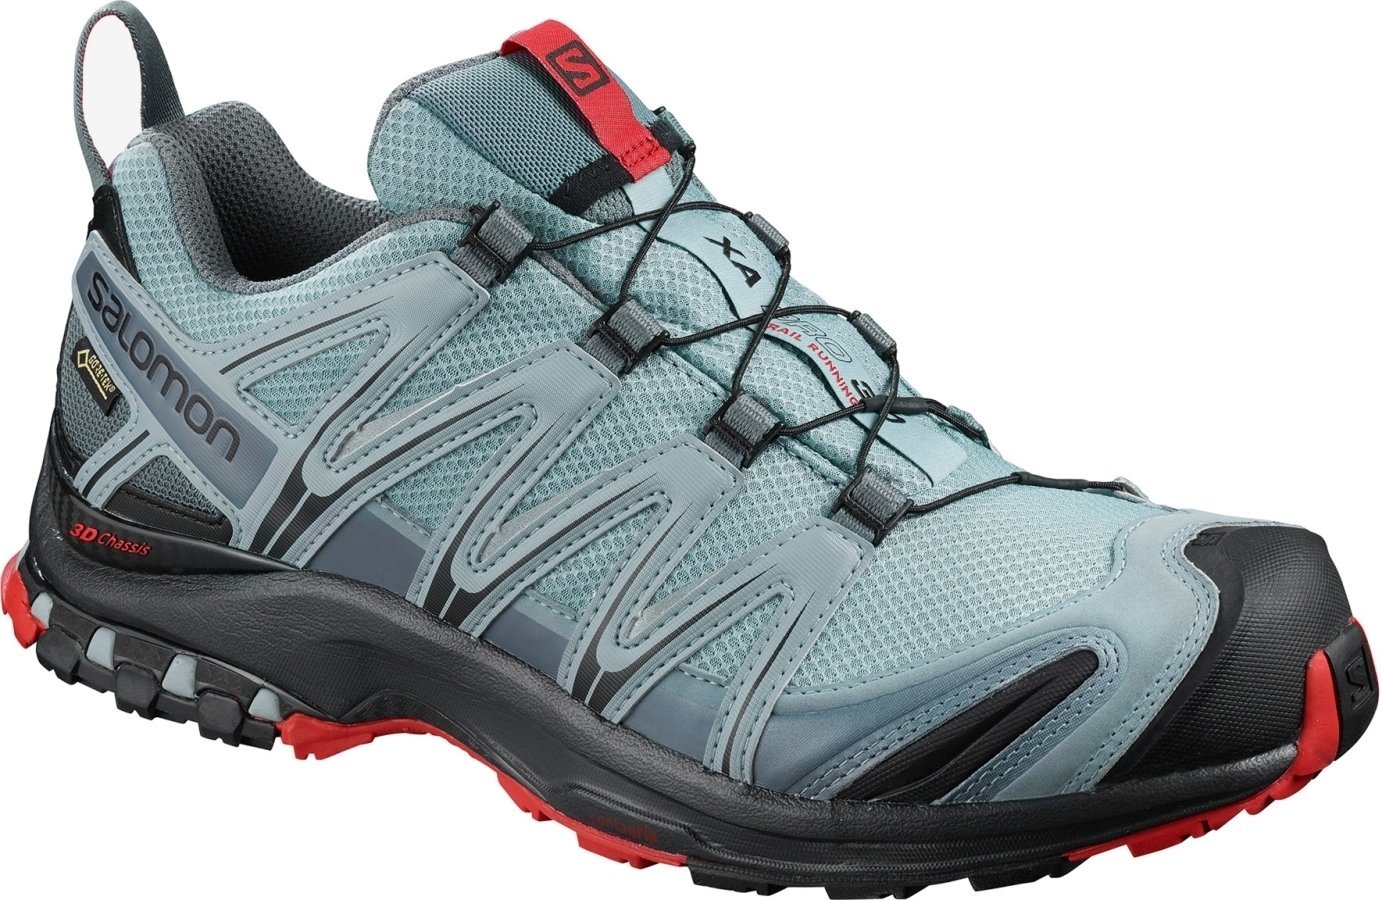 Chaussures outdoor hommes Salomon XA Pro 3D GTX Lead/Black/Barbados Cherry 43 1/3 Chaussures outdoor hommes